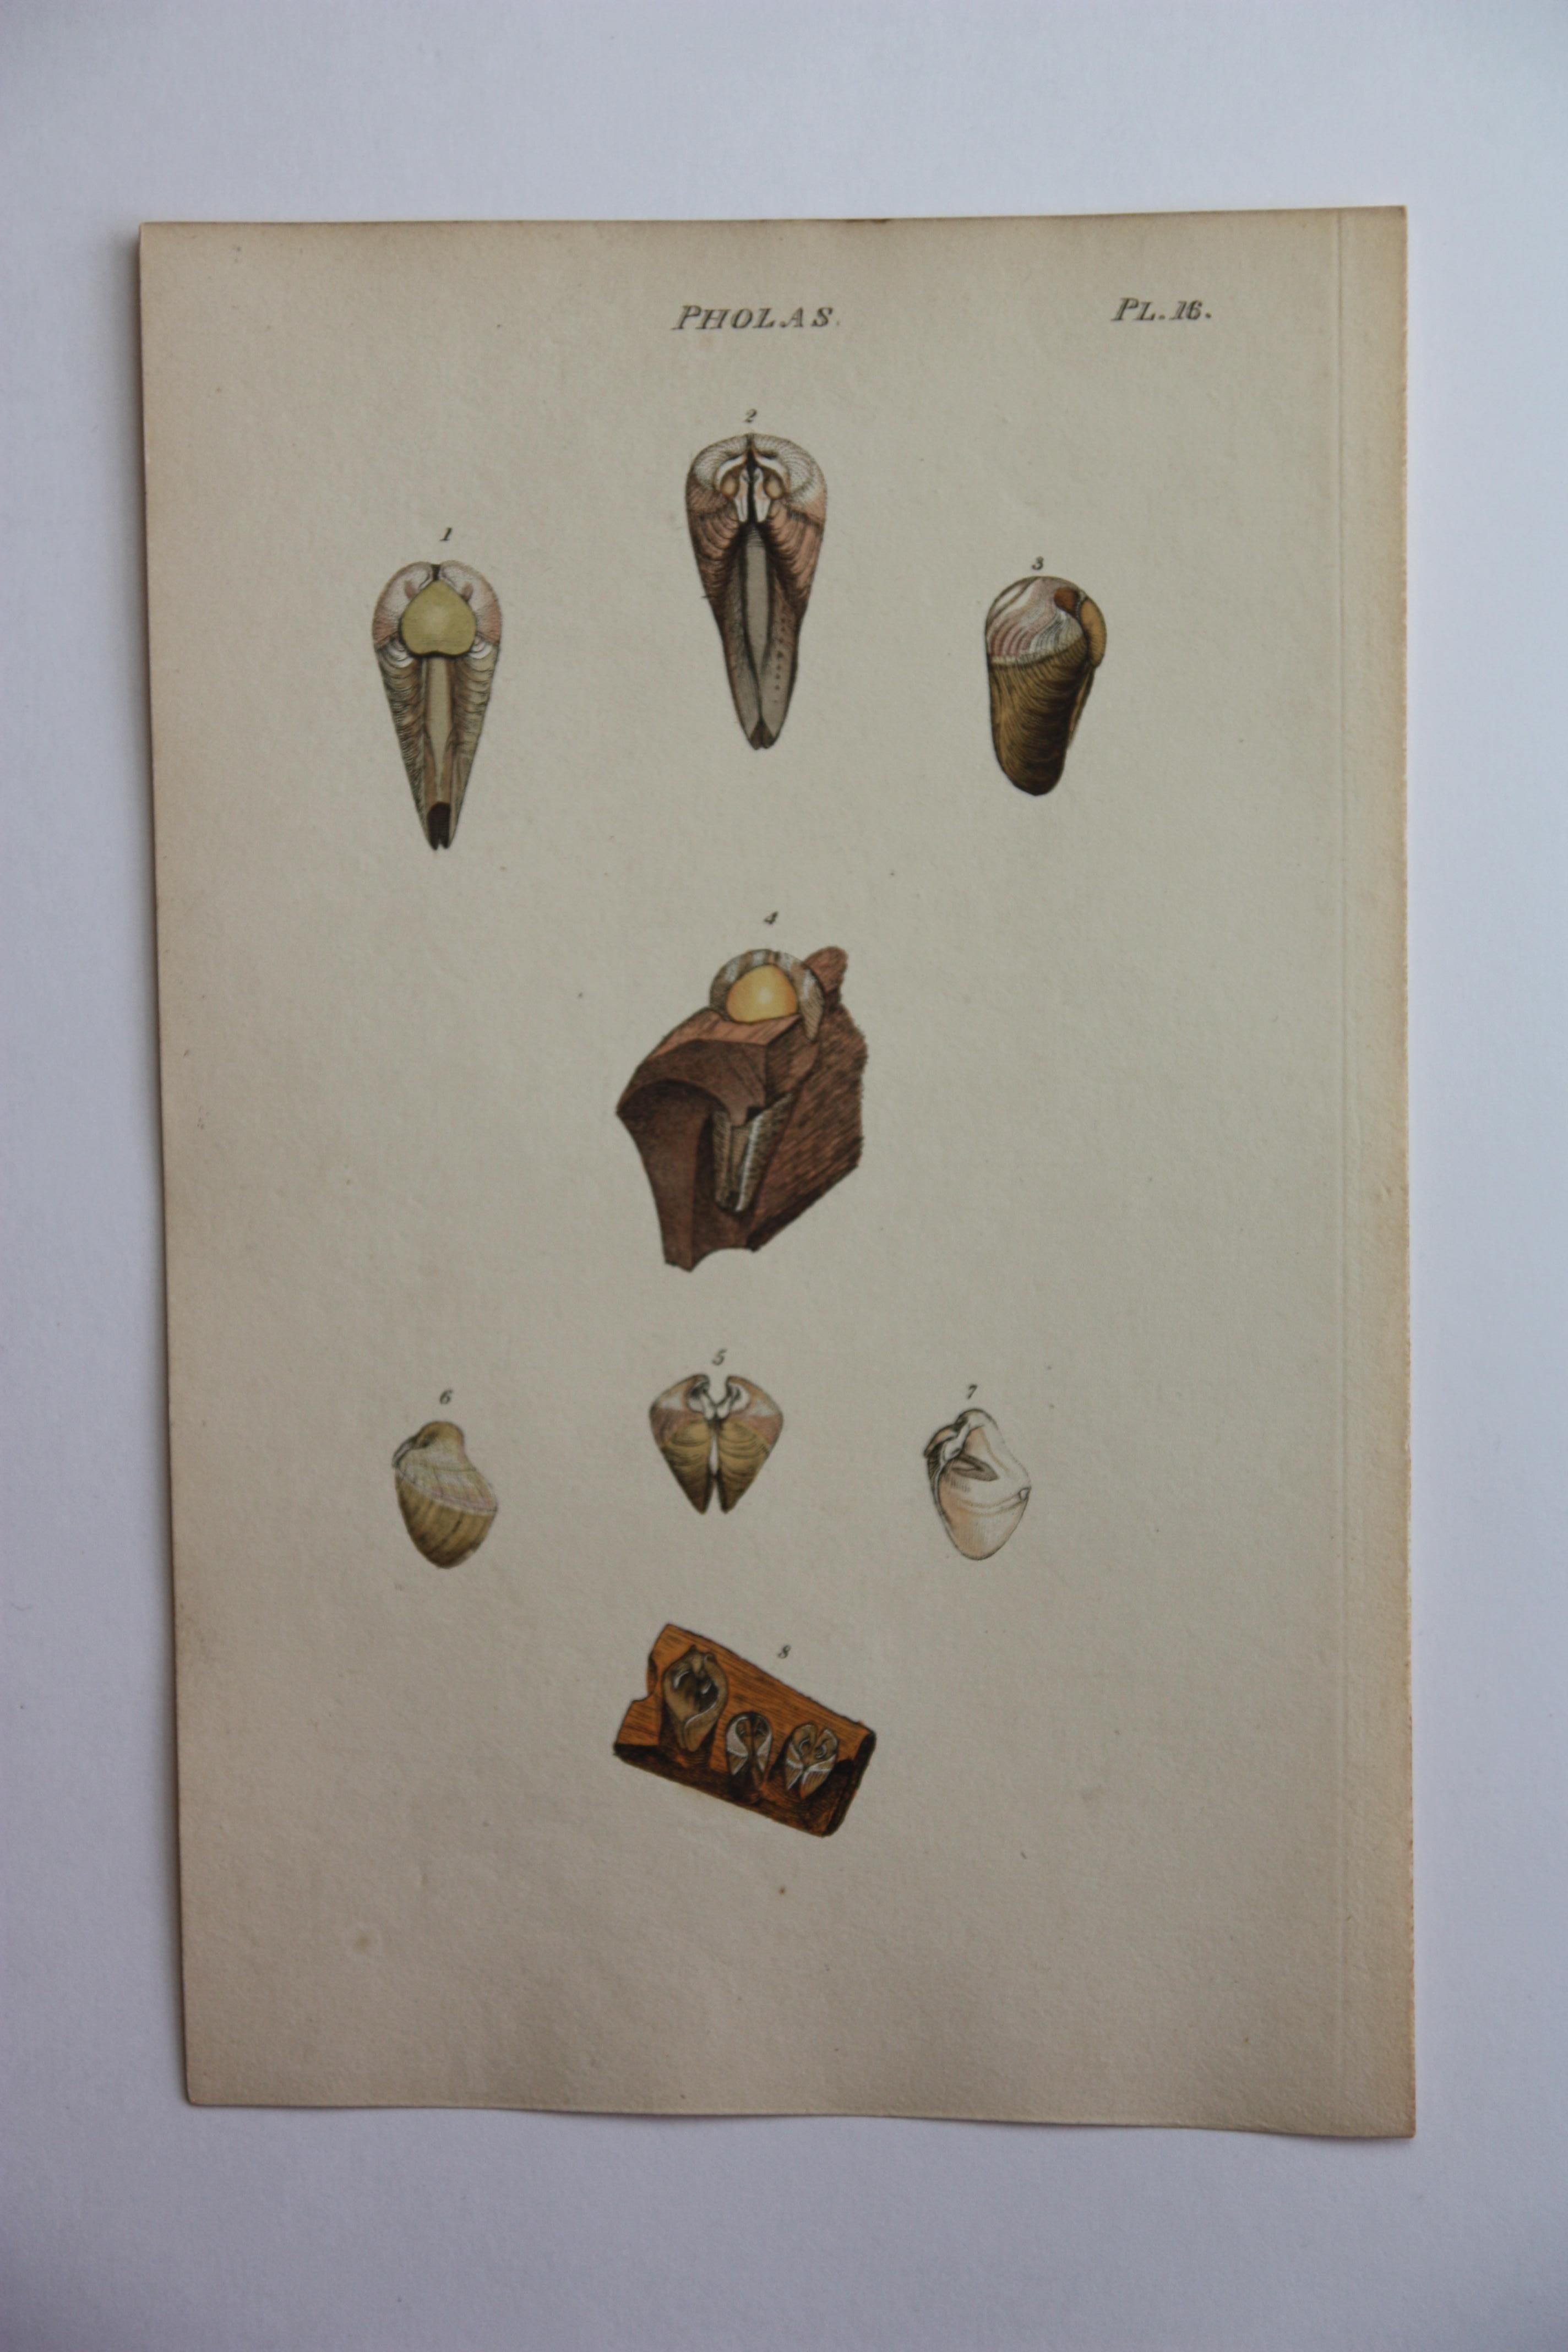 42 hand-colored, antique prints by William Wood.  Published in the book 